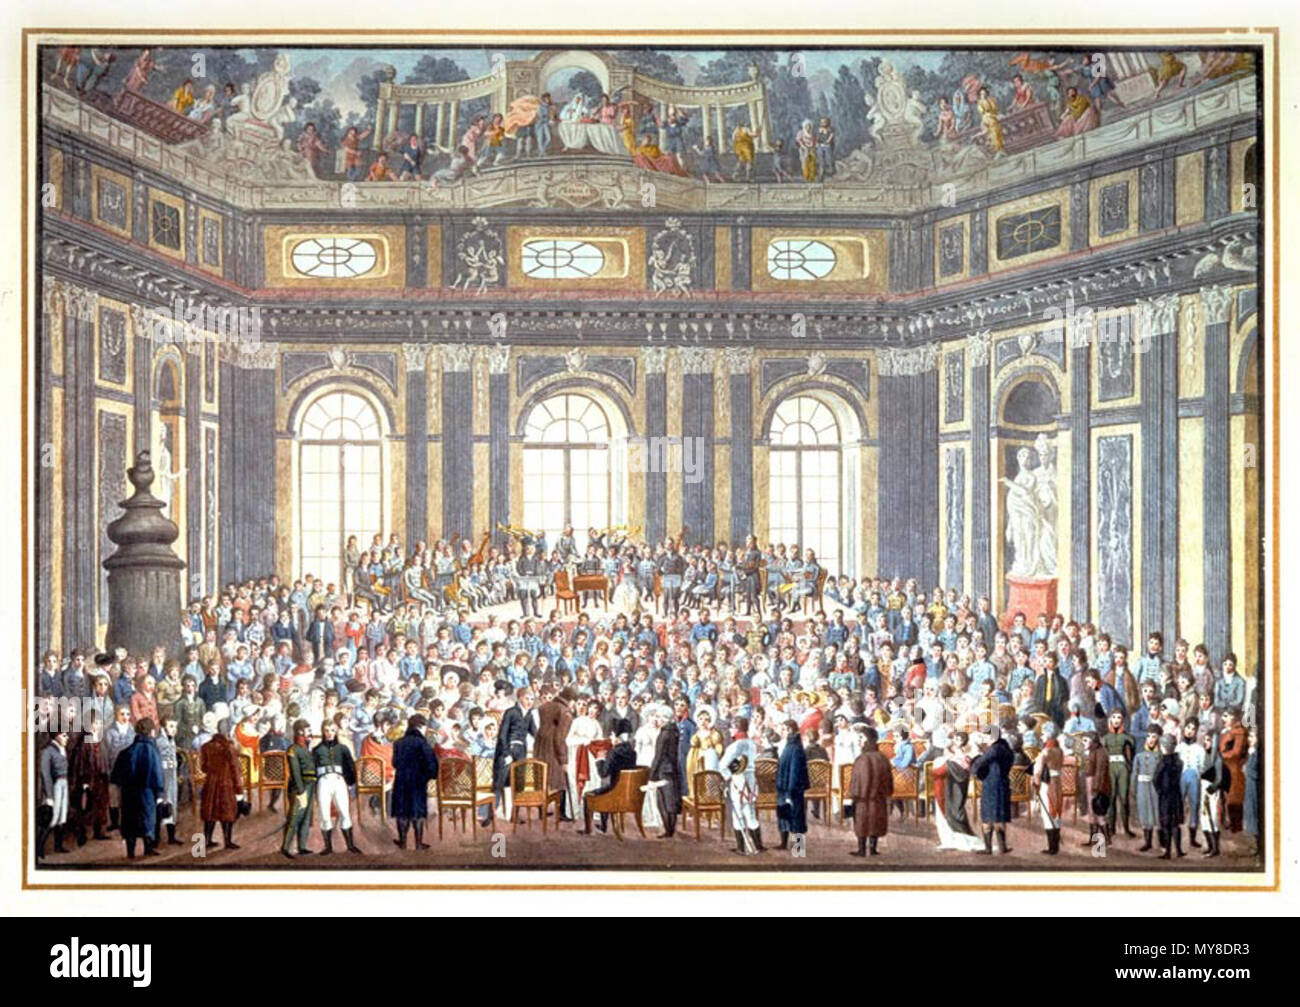 . English: Color print, from 1909, of a watercolor on the lid of a stationery box made by Balthazar Wigand and presented to the composer Joseph Haydn. It commemorates Haydn's attendance, in extreme old age, of a performance of his oratorio The Creation. (The composer can be seen seated in the lower center of the image, wearing wig and hat.) The original of this picture was lost in 1945. 1808. Balthasar Wigand 5 1808PerformanceOfHaydnCreation Stock Photo